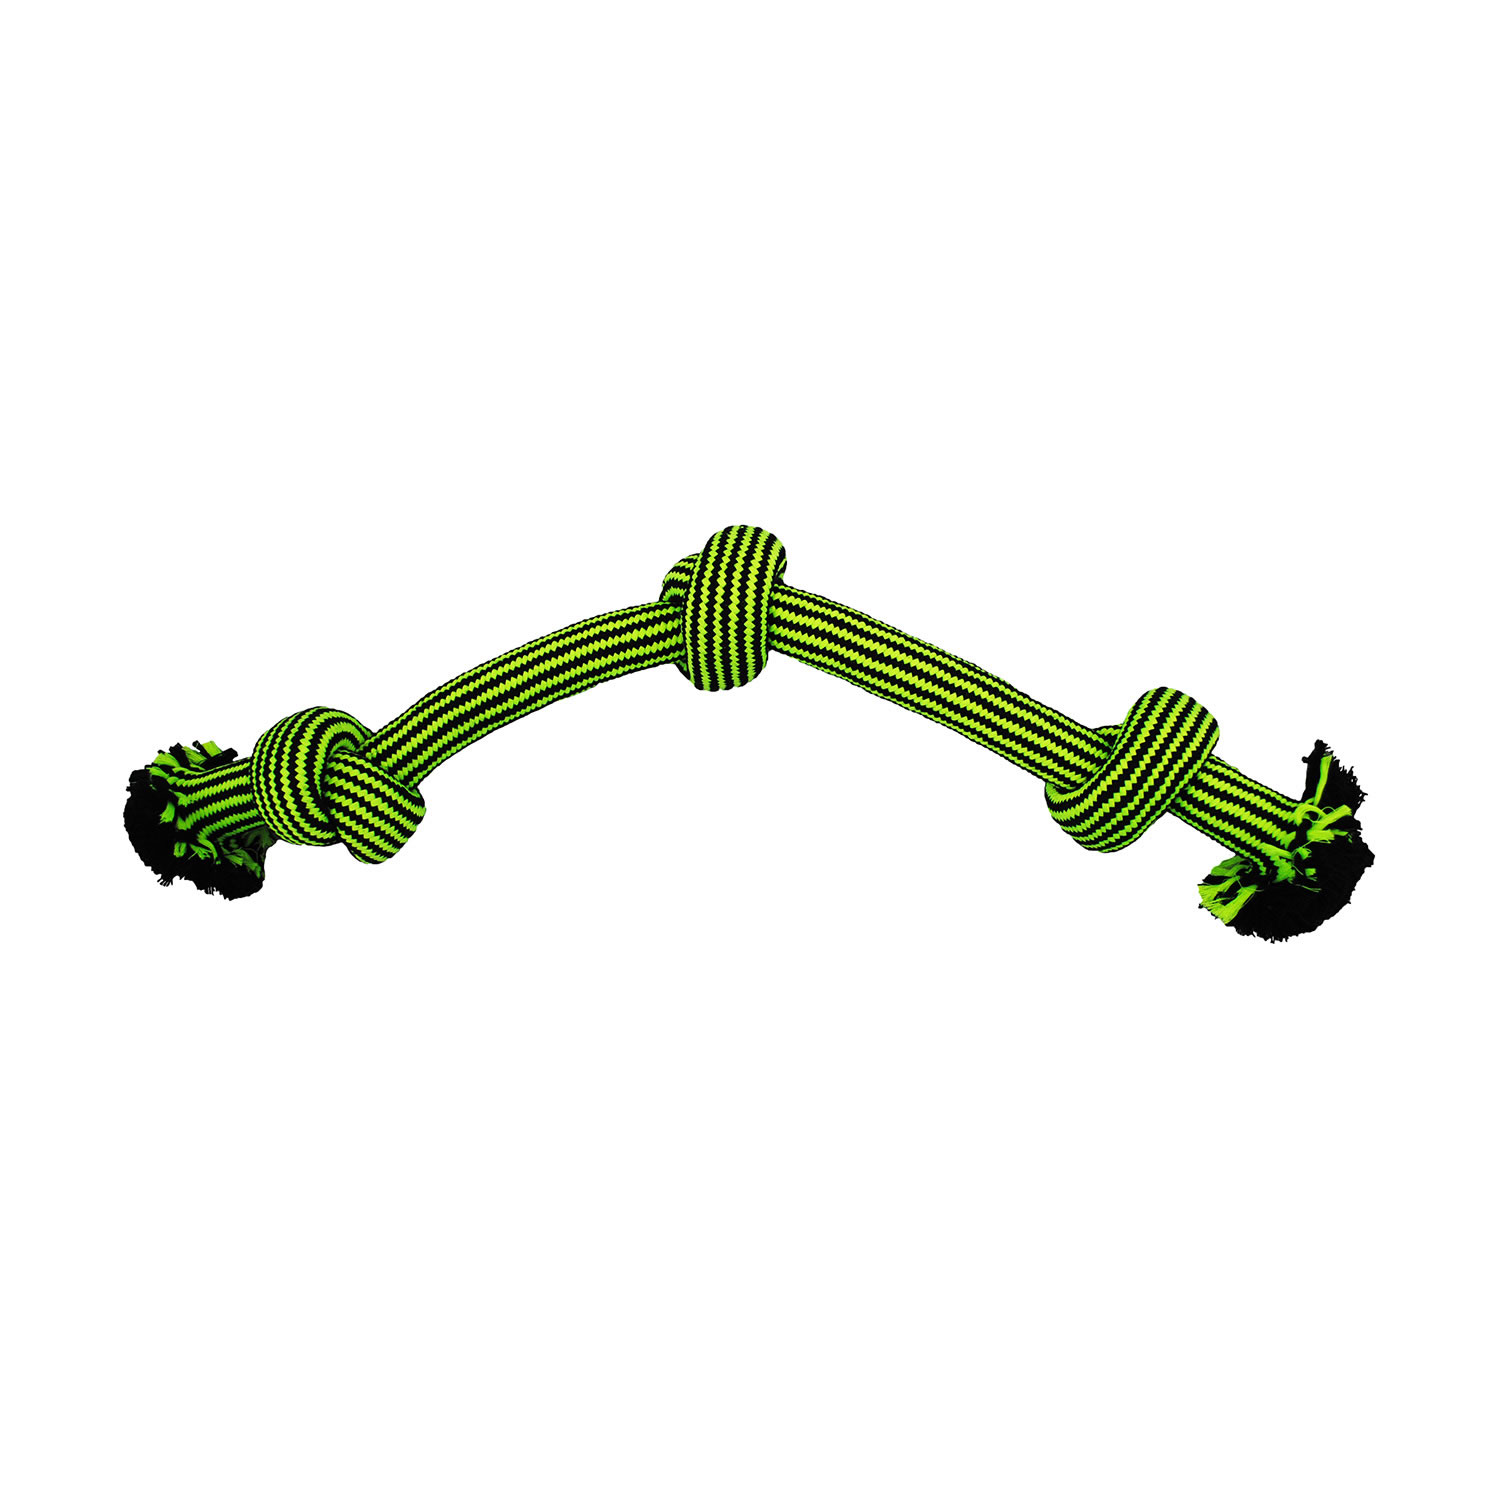 JOLLY PETS KNOT-N-CHEW 3 KNOT ROPE LARGE/XLARGE GREEN/BLACK 3 KNOT